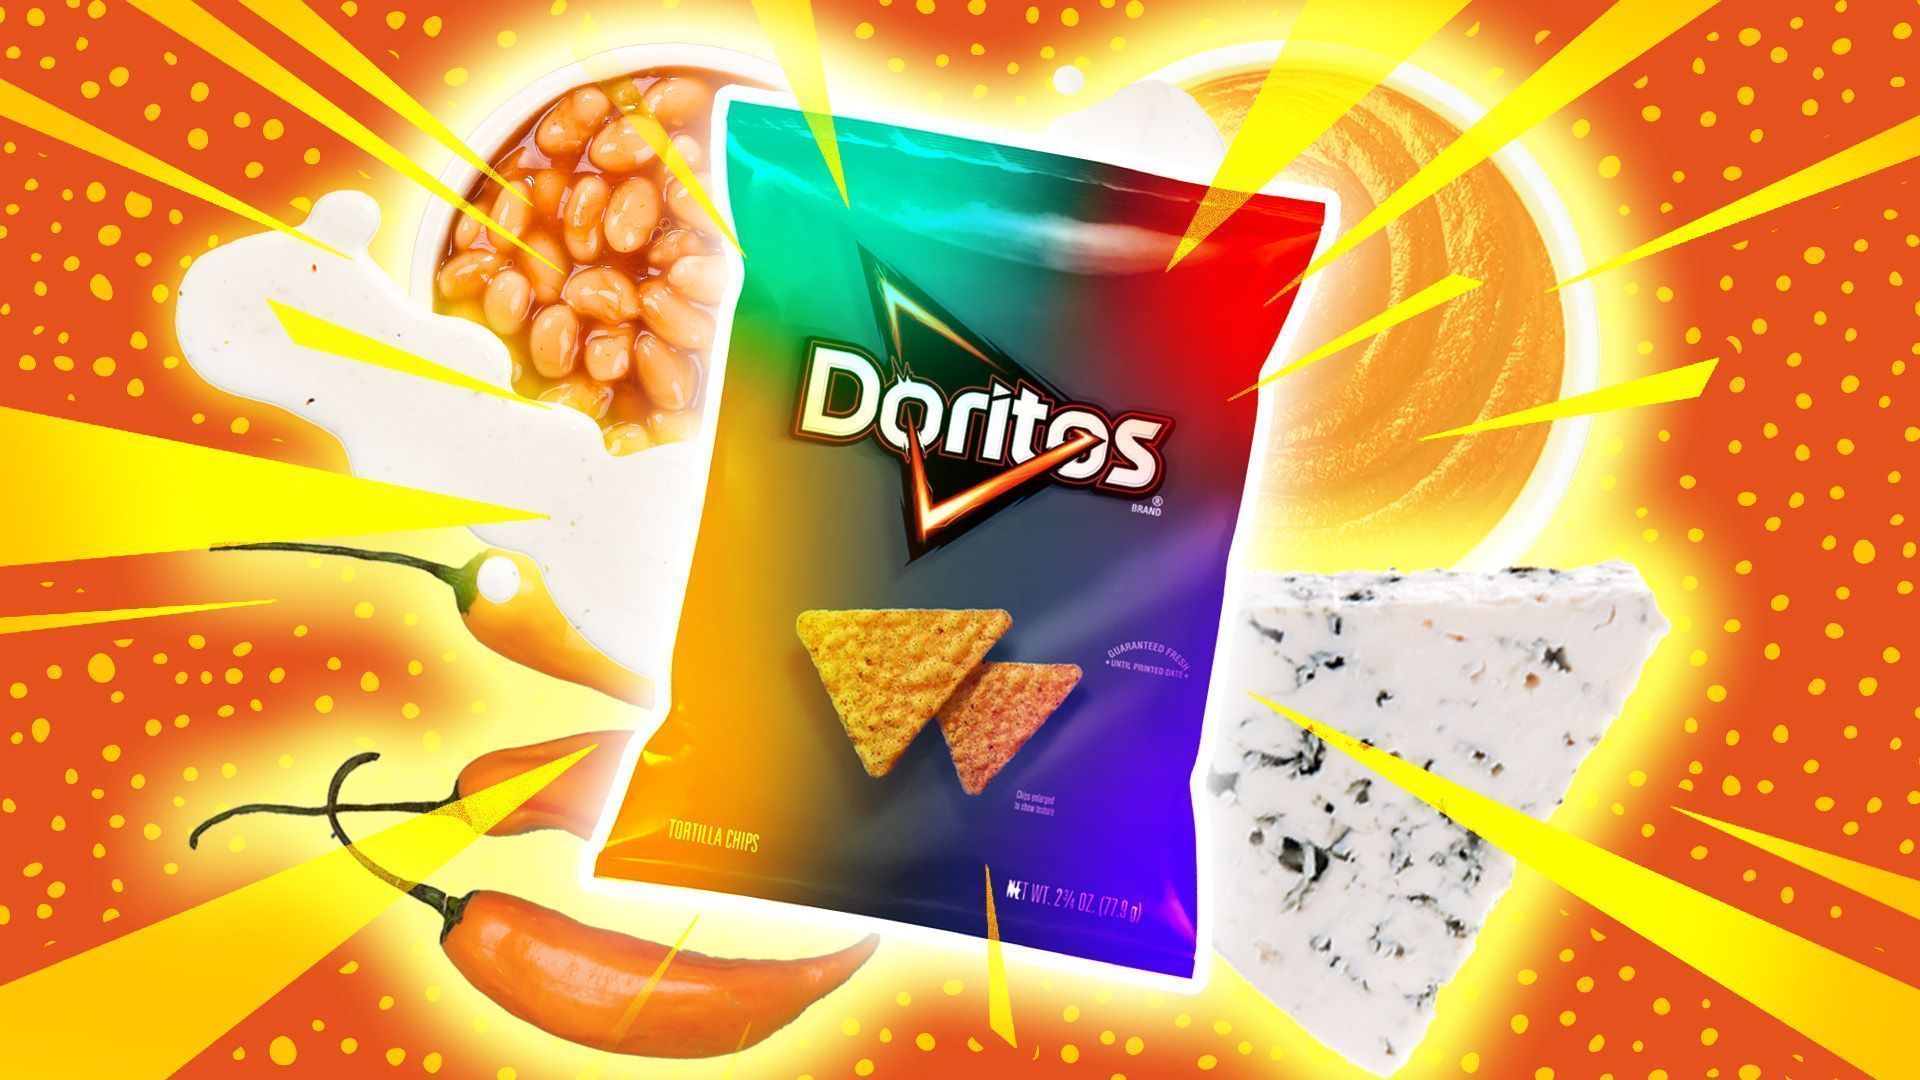 A bag of Doritos surrounded by beans, cheese, and peppers on a red and yellow background - Doritos